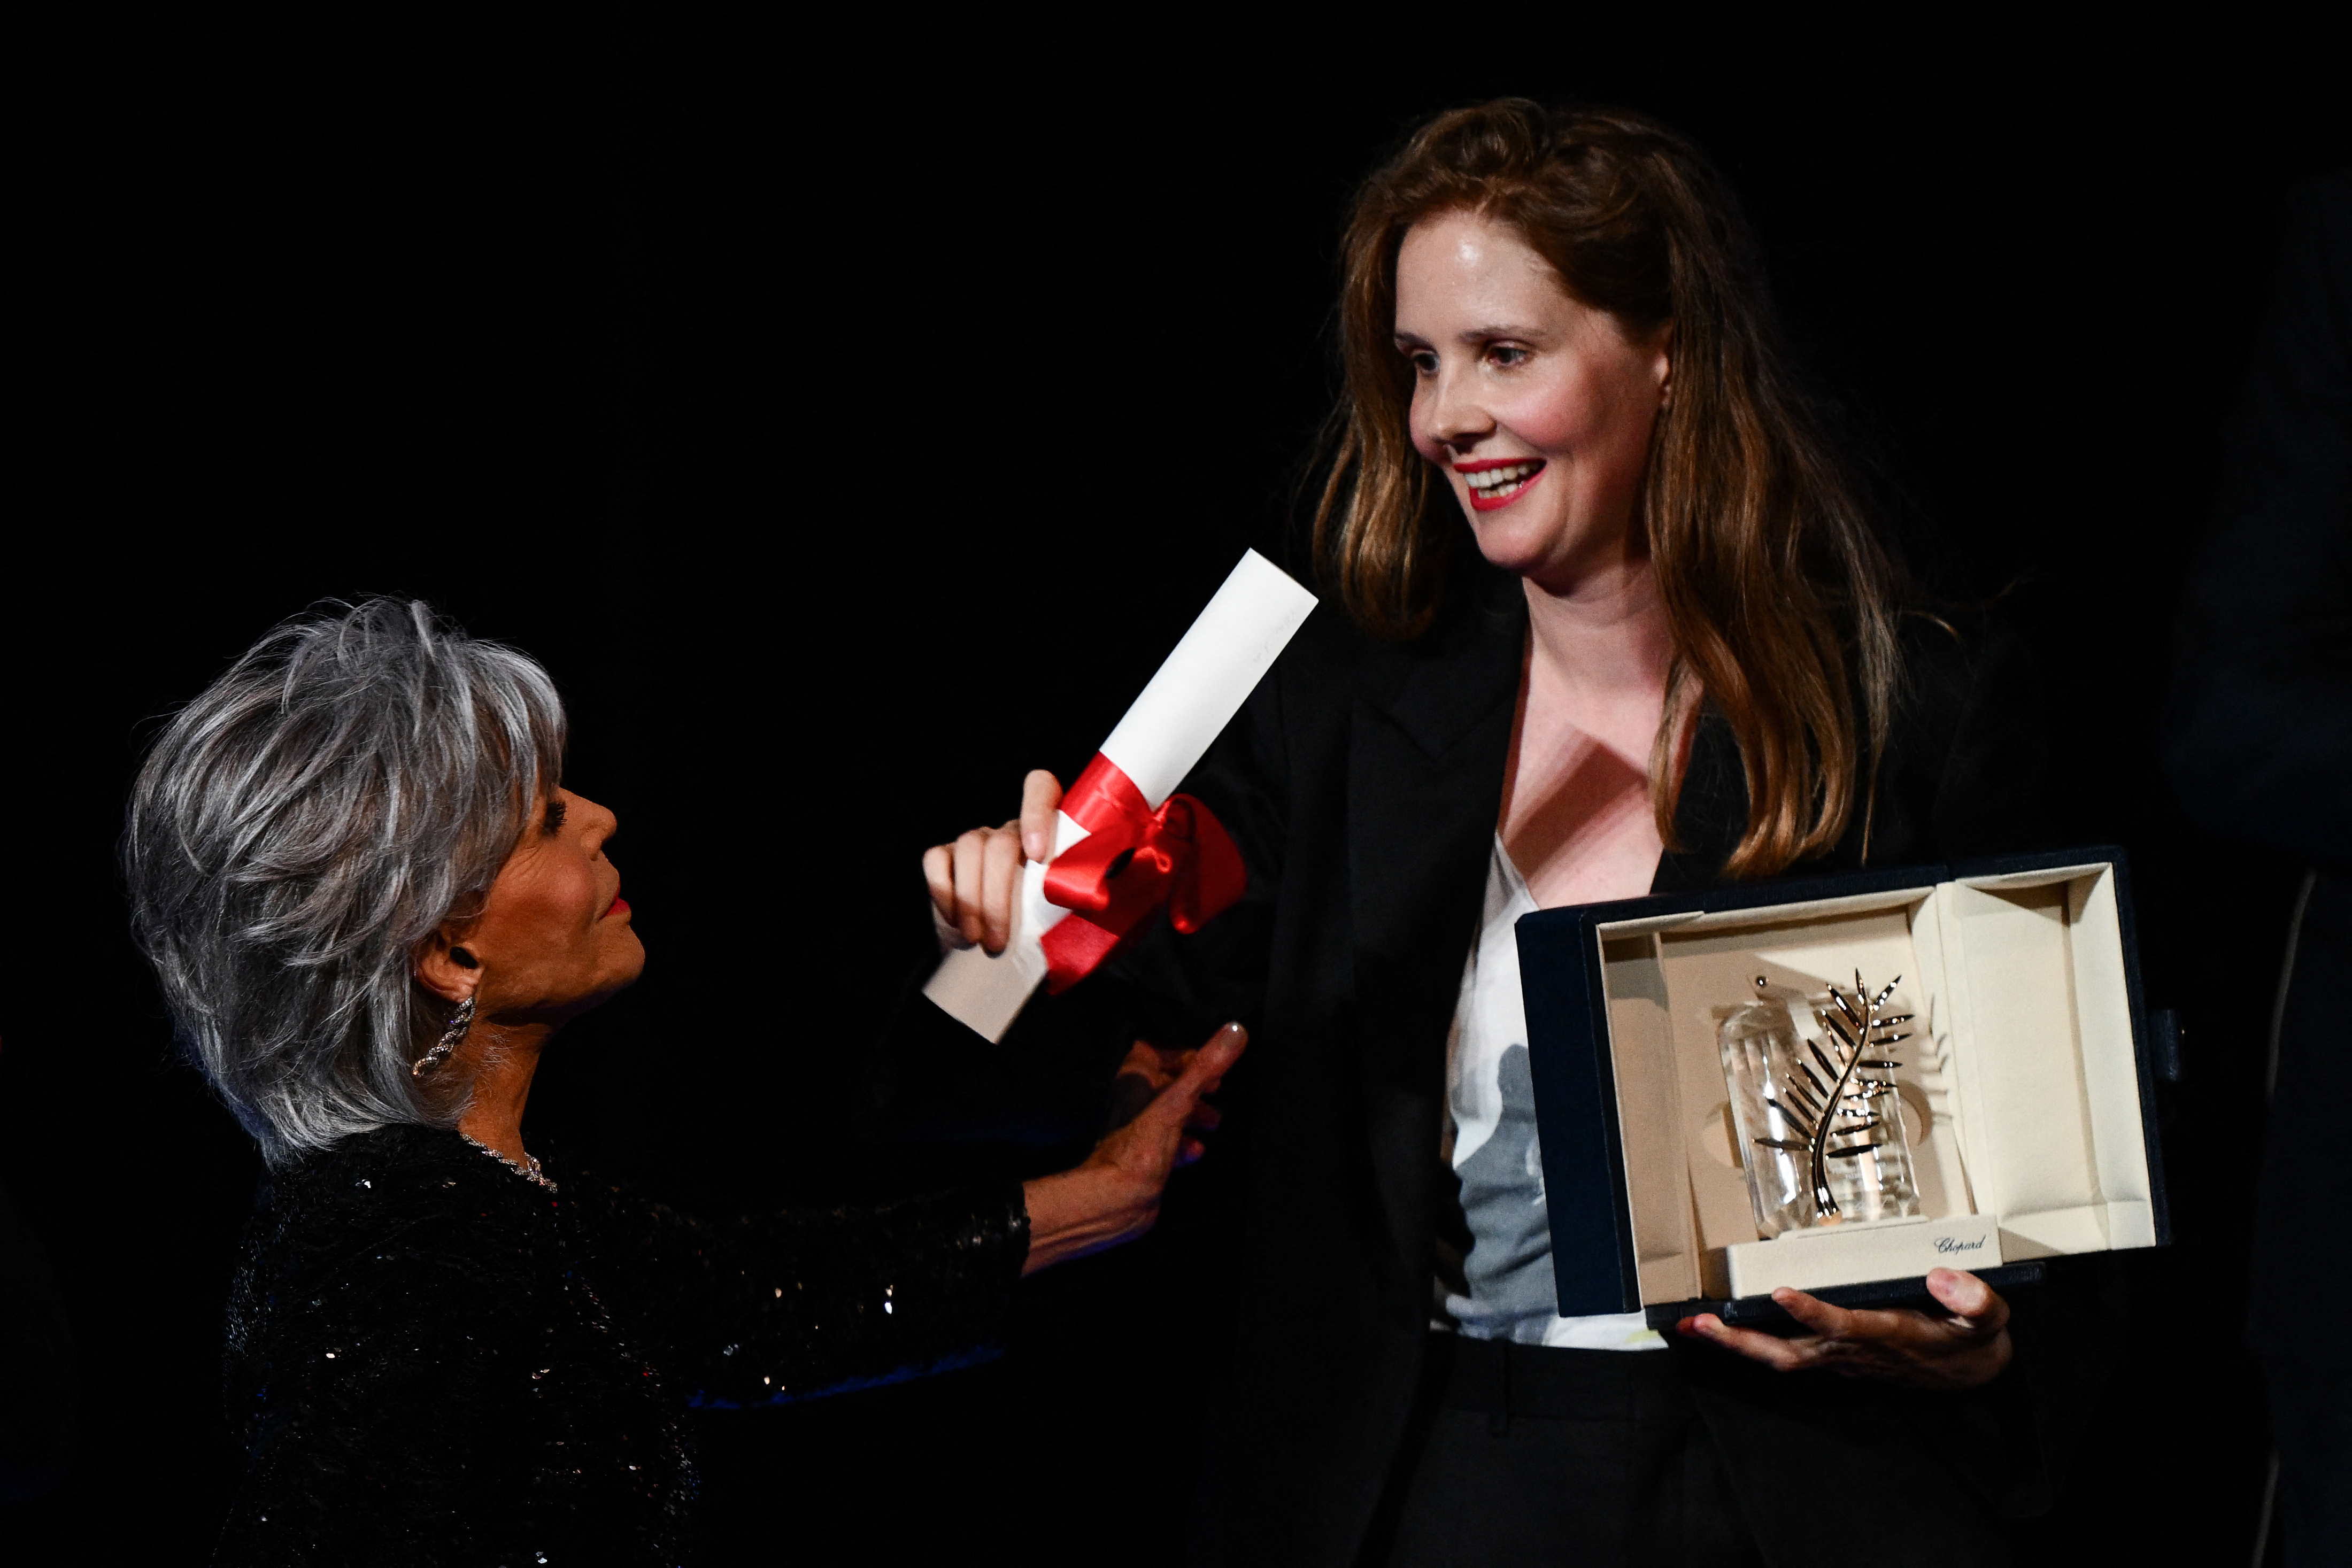 Jane Fonda on stage with Justine Triet as she receives the Palme d'Or Award for "Anatomy of a Fall" during the 76th annual Cannes Film Festival at Palais des Festivals on May 27, 2023 in Cannes, France | Source: Getty Images